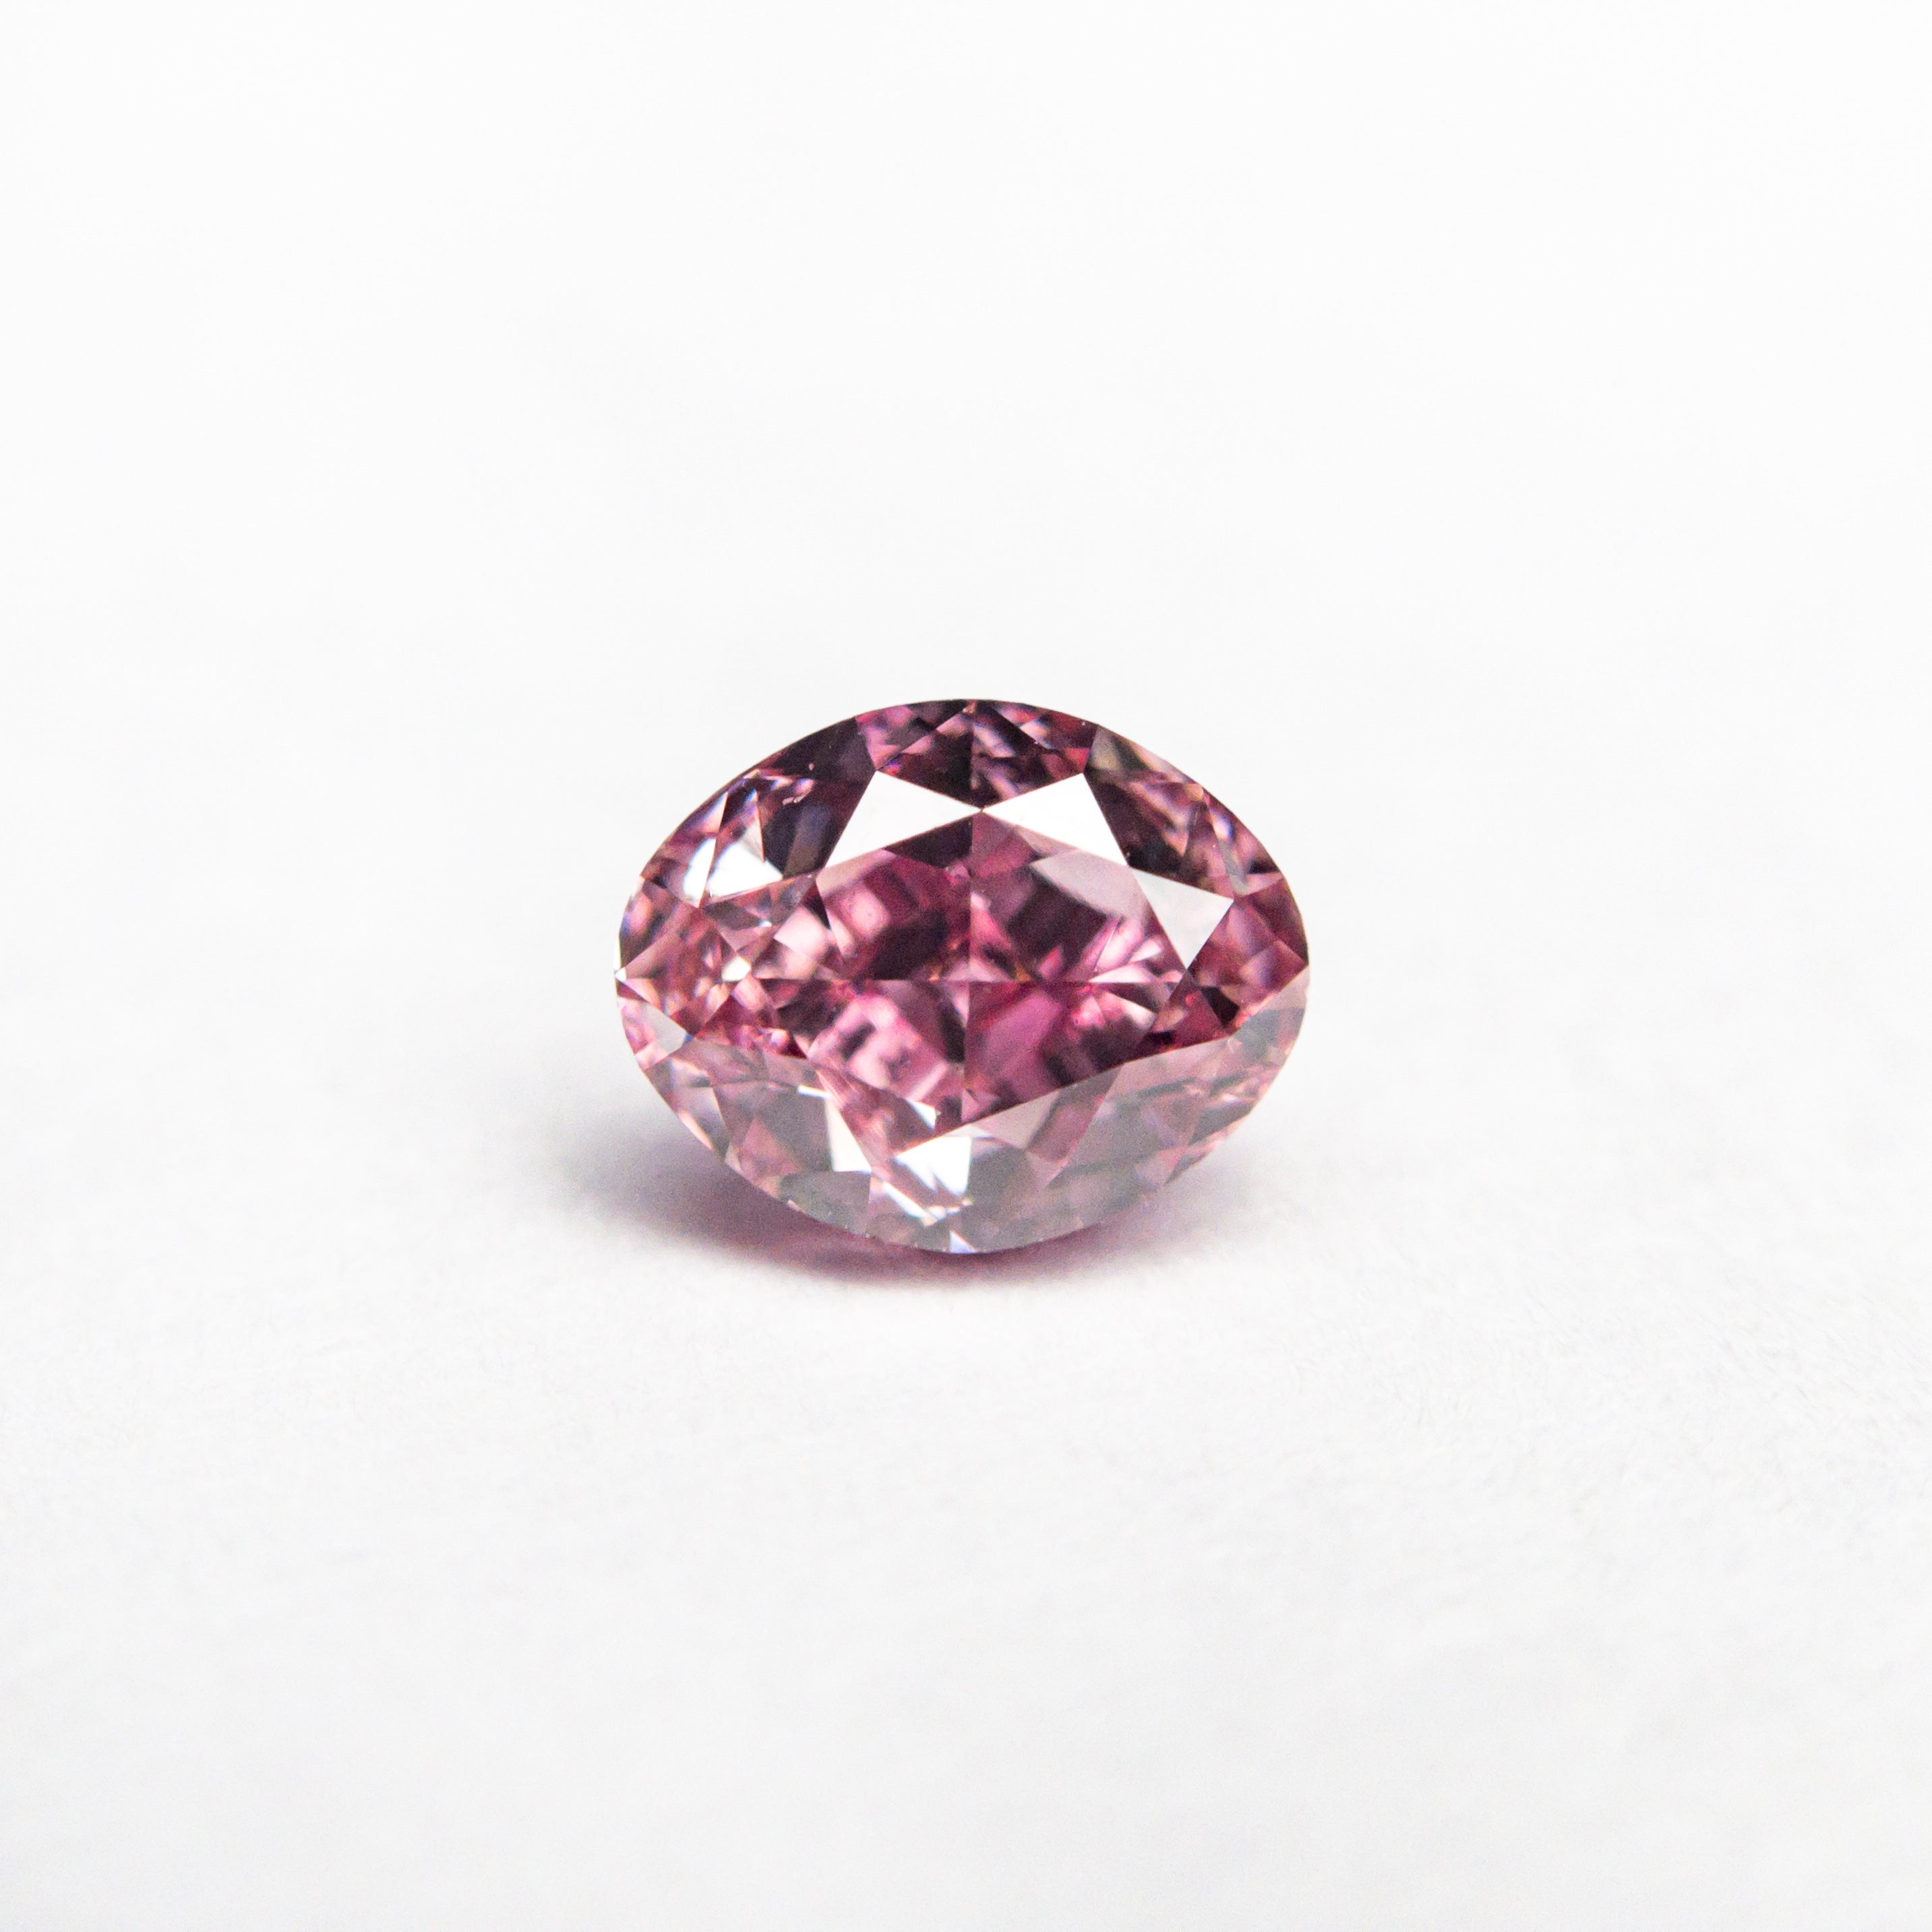 0.61ct 5.57x4.44x3.13mm GIA VS2 Fancy Pink Oval Brilliant 🇦🇺 24137-01